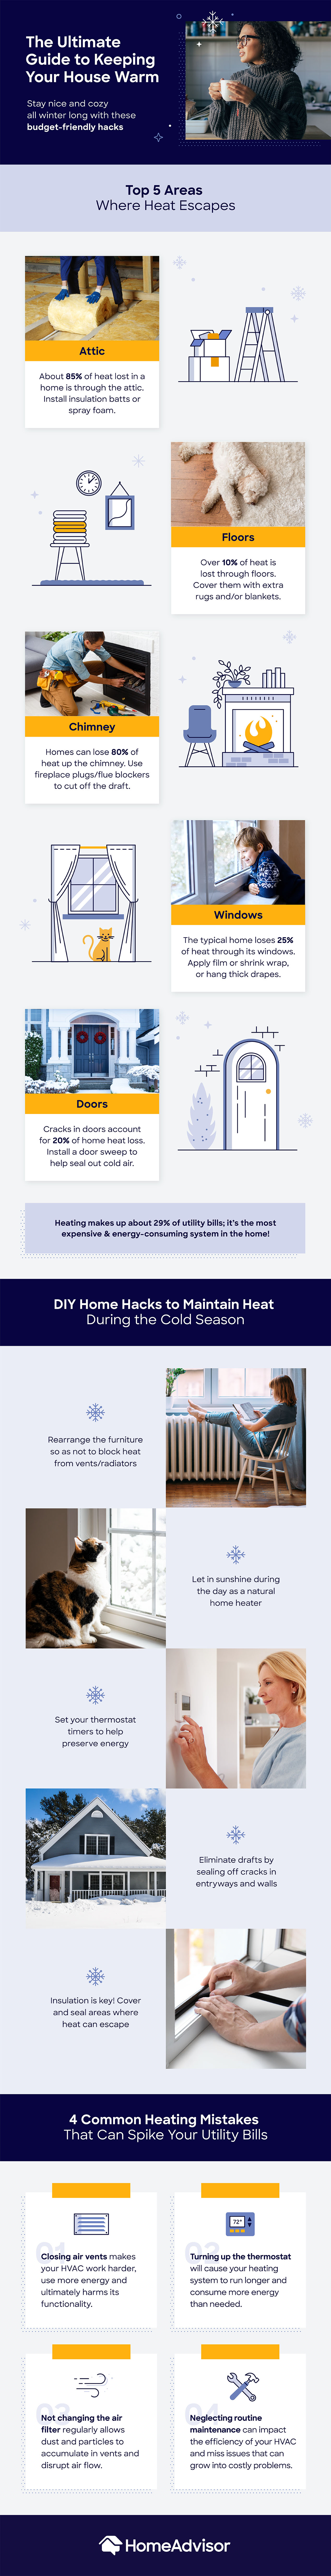 ultimate guide to keeping your house warm infographic